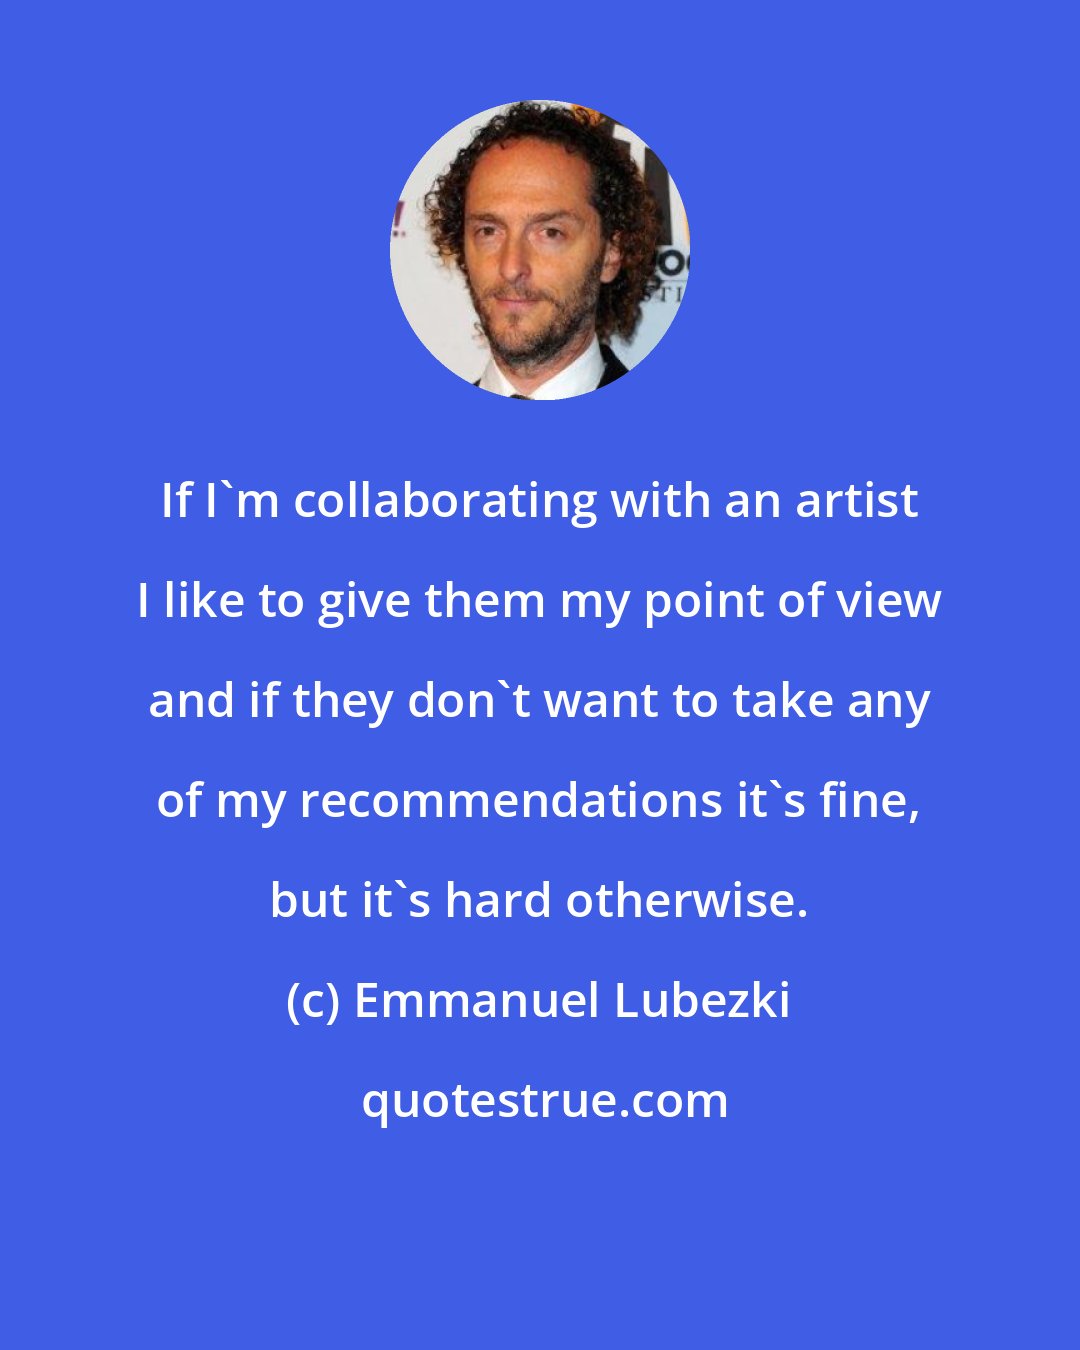 Emmanuel Lubezki: If I'm collaborating with an artist I like to give them my point of view and if they don't want to take any of my recommendations it's fine, but it's hard otherwise.